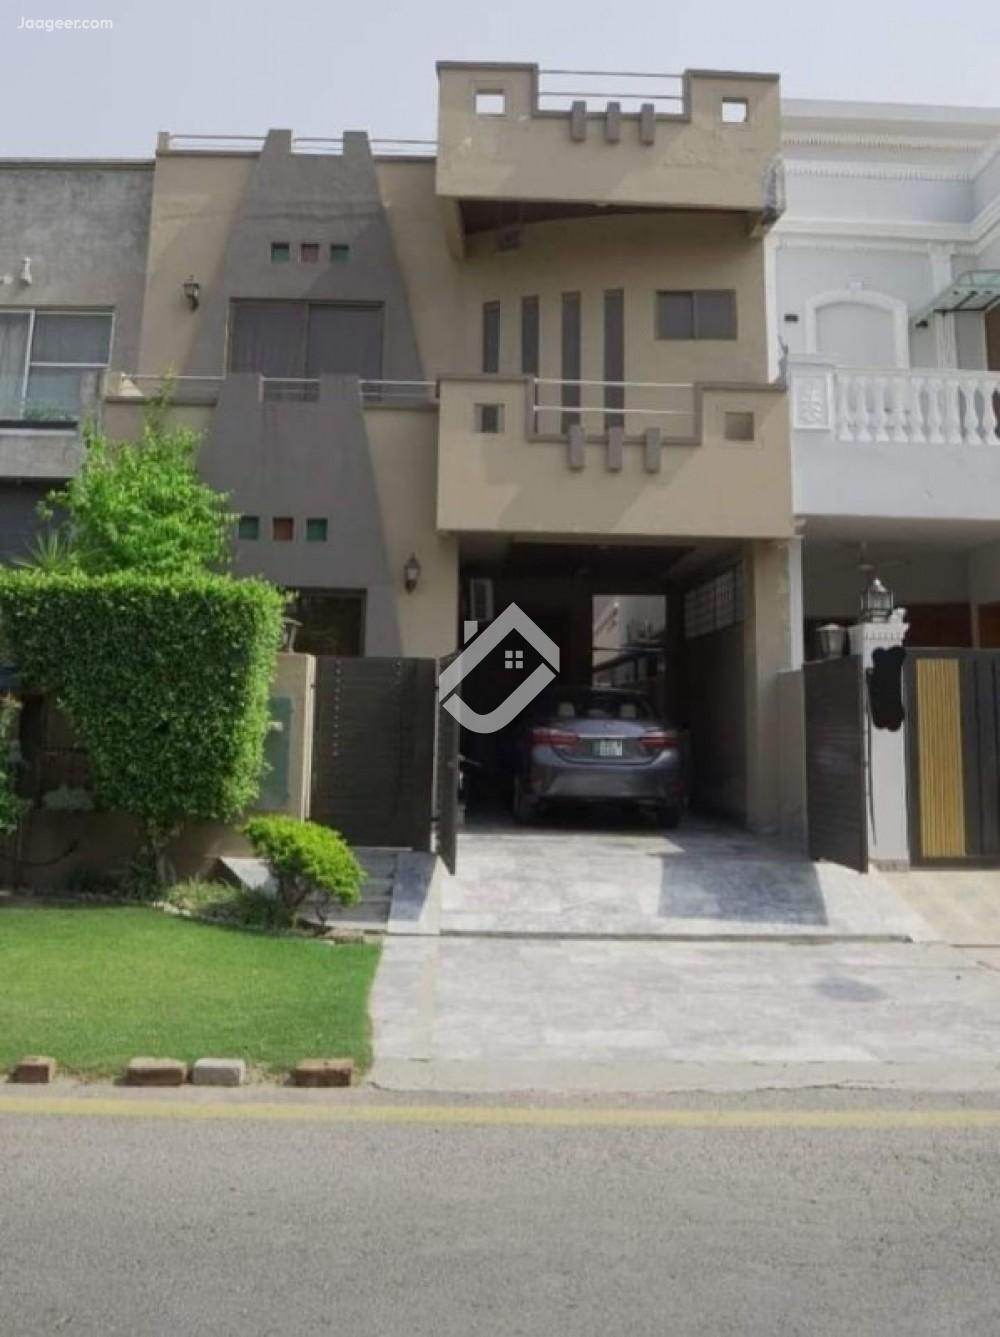 View  8.5 Marla Double Storey House For Sale In DHA Phase 5  in DHA Phase 5, Lahore